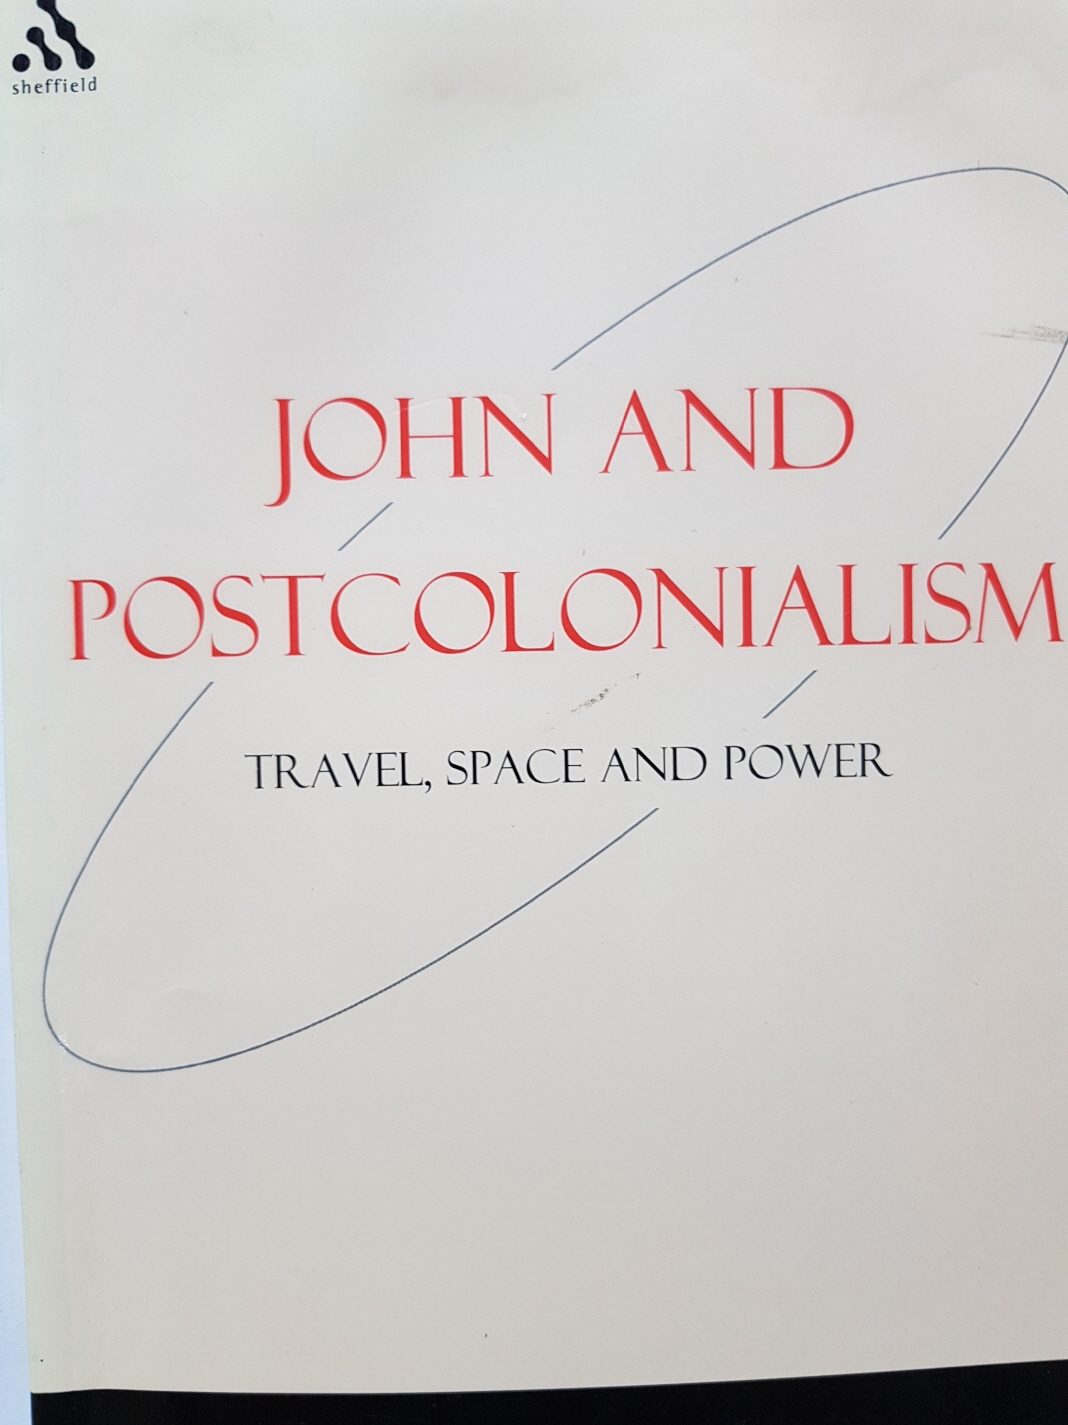 John and Postcolonialism: Travel, Space, and Power (Bible and Postcolonialism)